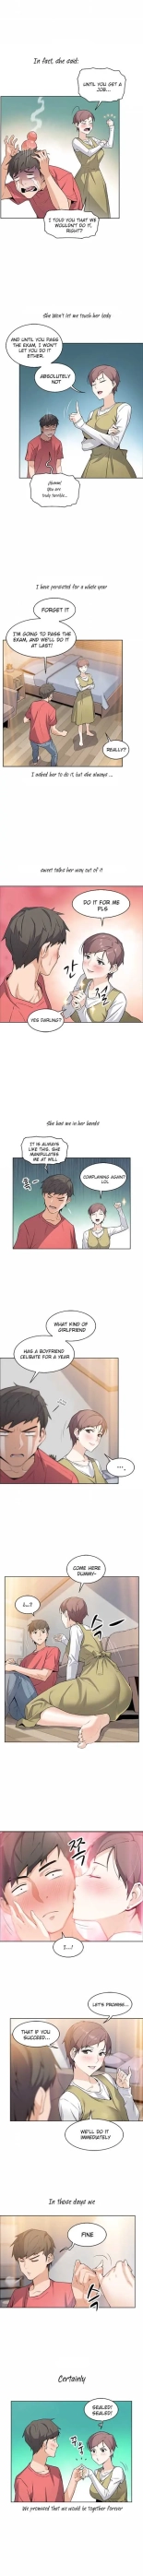 Housekeeper  Ch.4949   Completed : page 7